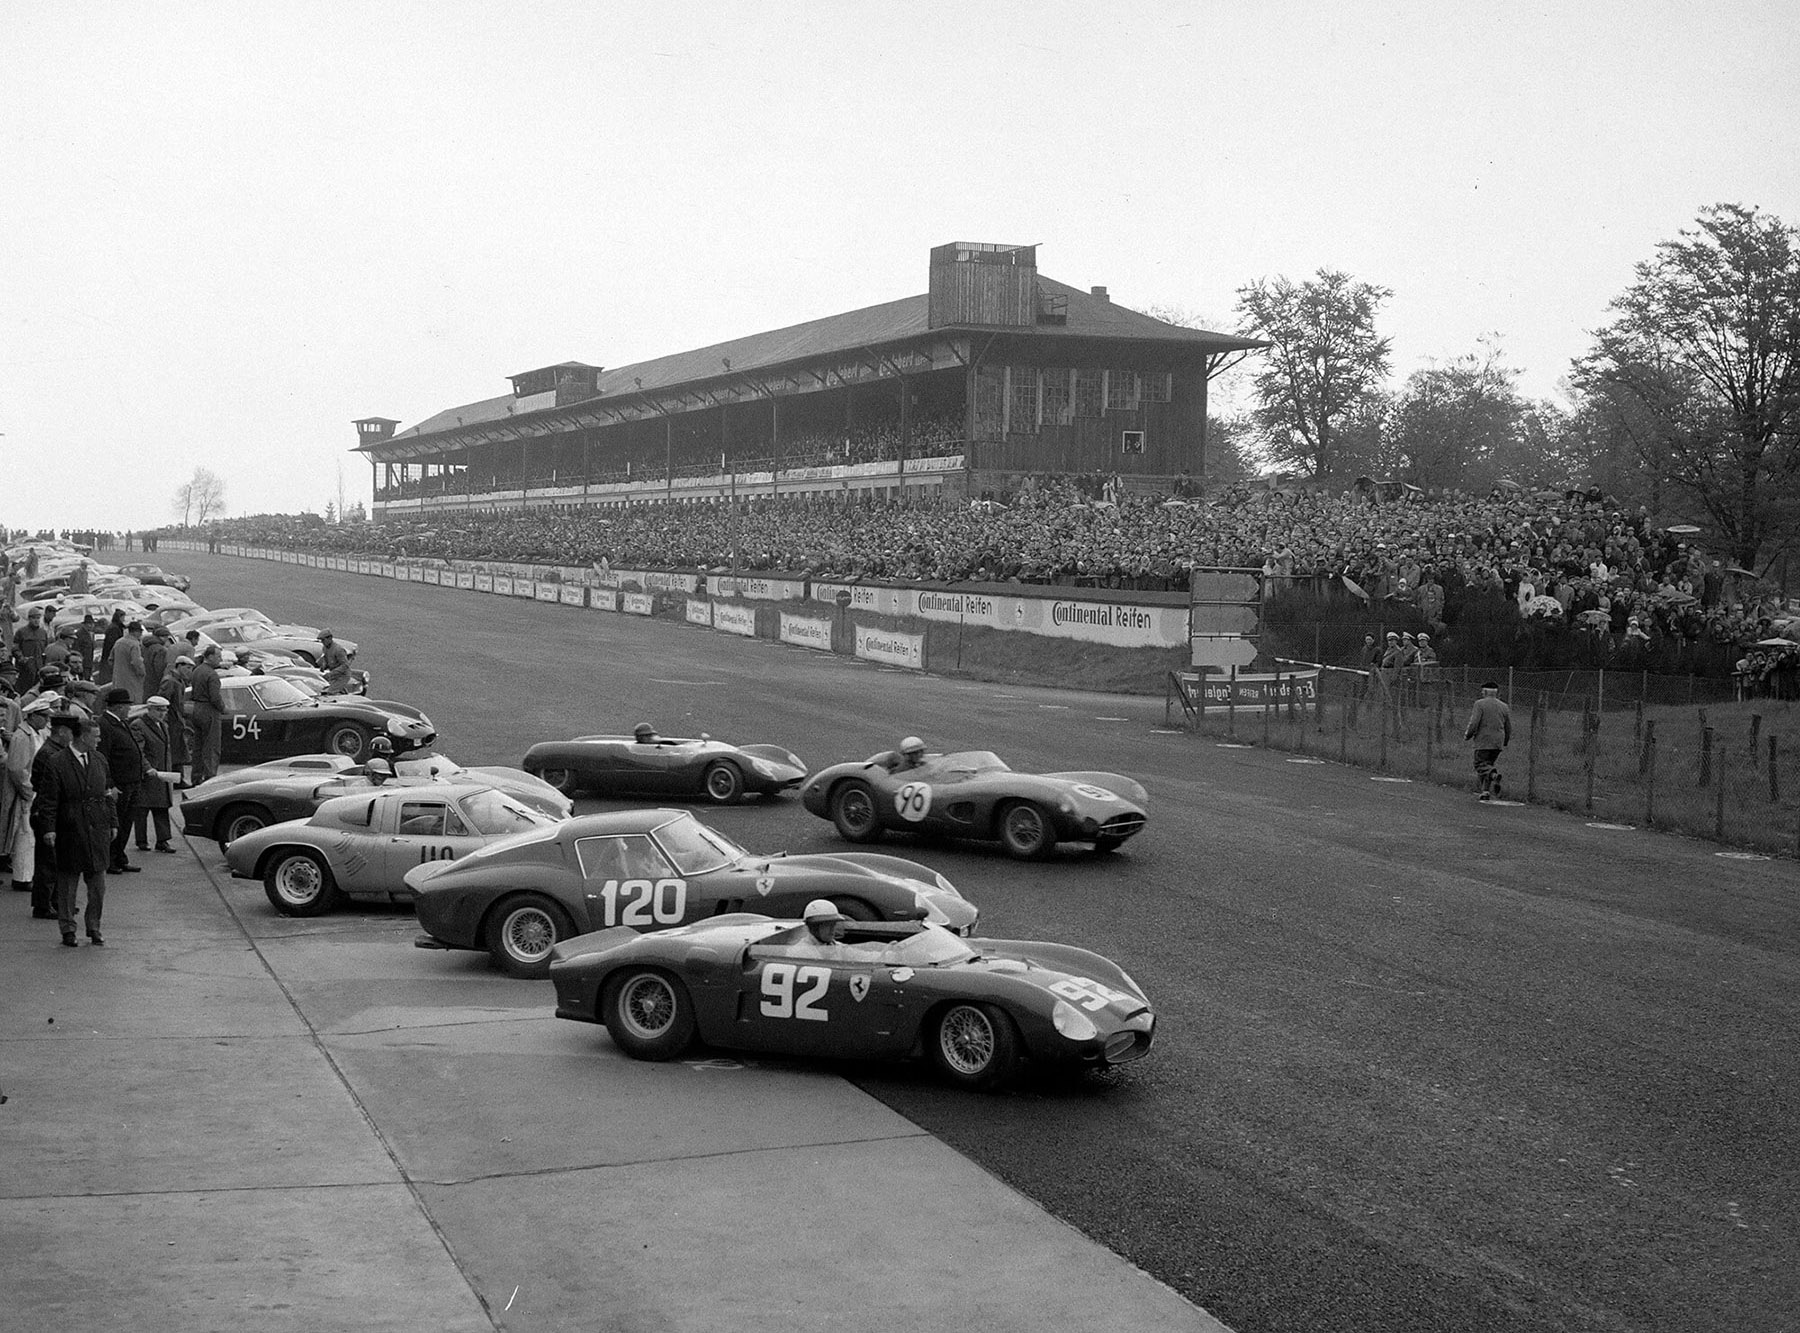 Ferrari Dino 246 SP (#92) piloted by Phil Hill and Olivier Gendebien leads chassis no. 3765 (#120) piloted by Willy Mairesse and Mike Parkes at the start of the Nürburgring 1000 kms at Nürburgring on 27 May 1962.